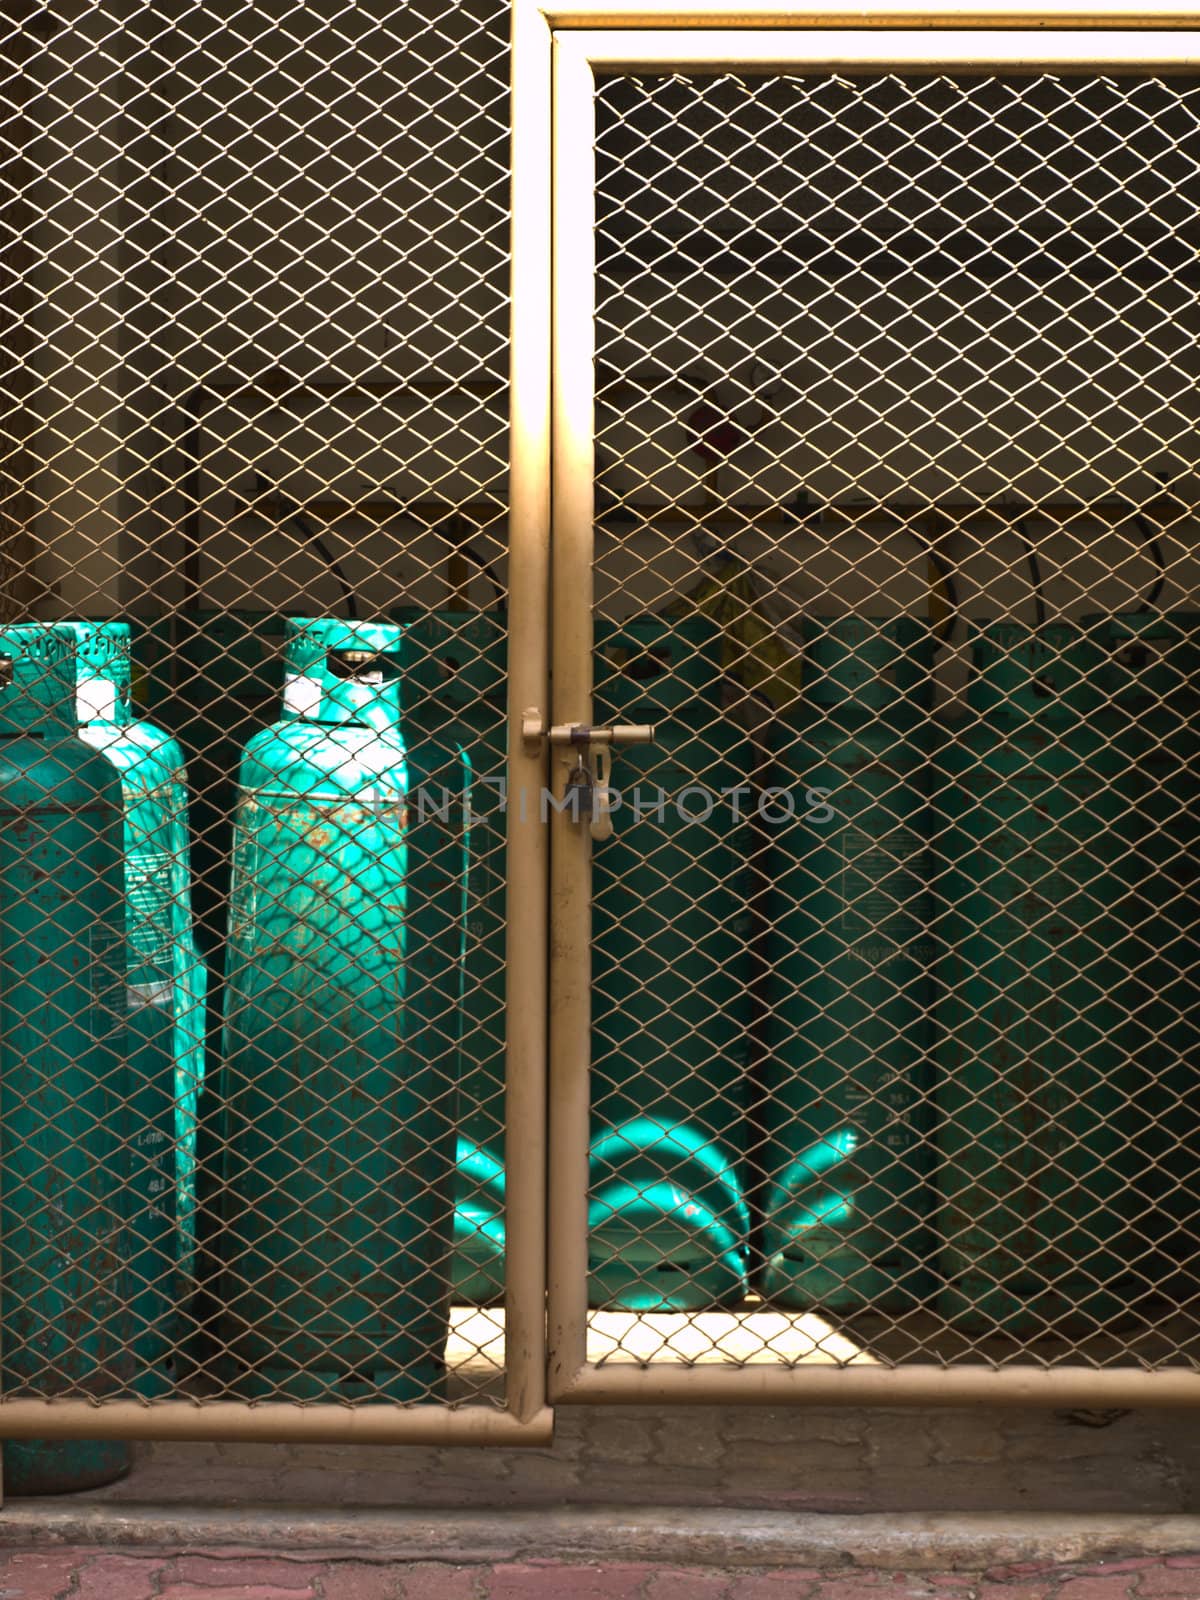 Gas bottles in a row behind a fence for background use